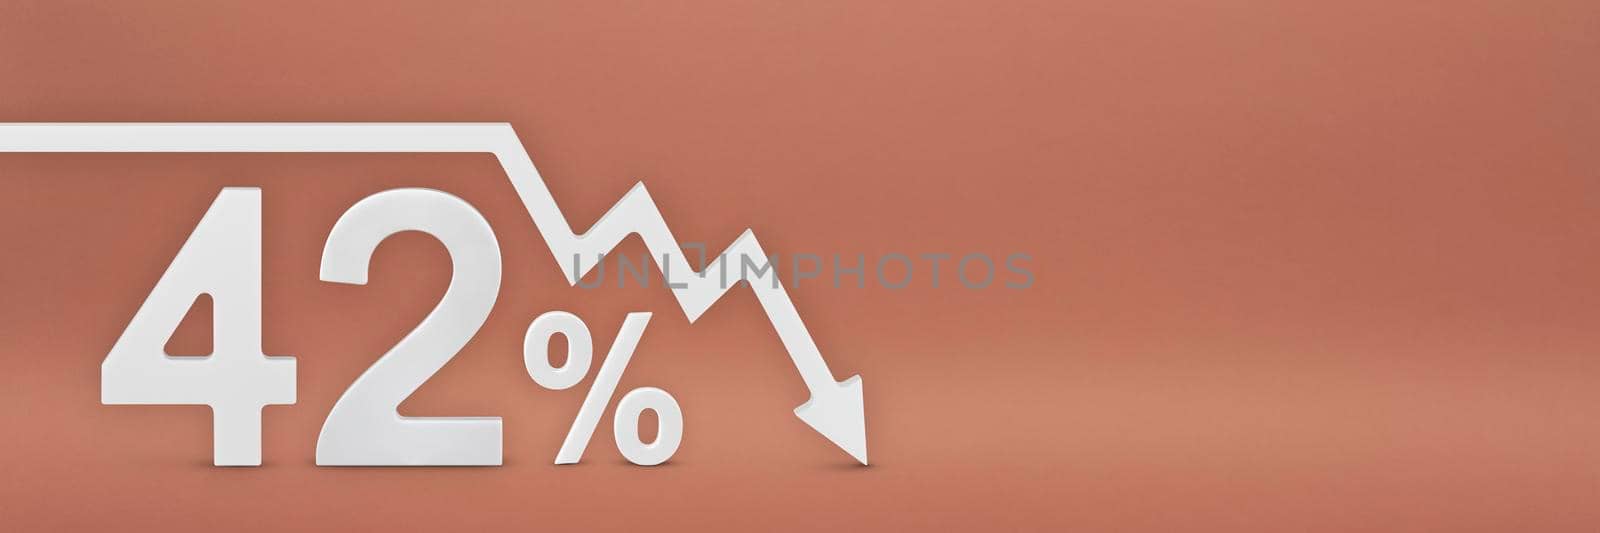 forty-two percent, the arrow on the graph is pointing down. Stock market crash, bear market, inflation.Economic collapse, collapse of stocks.3d banner,42 percent discount sign on a red background